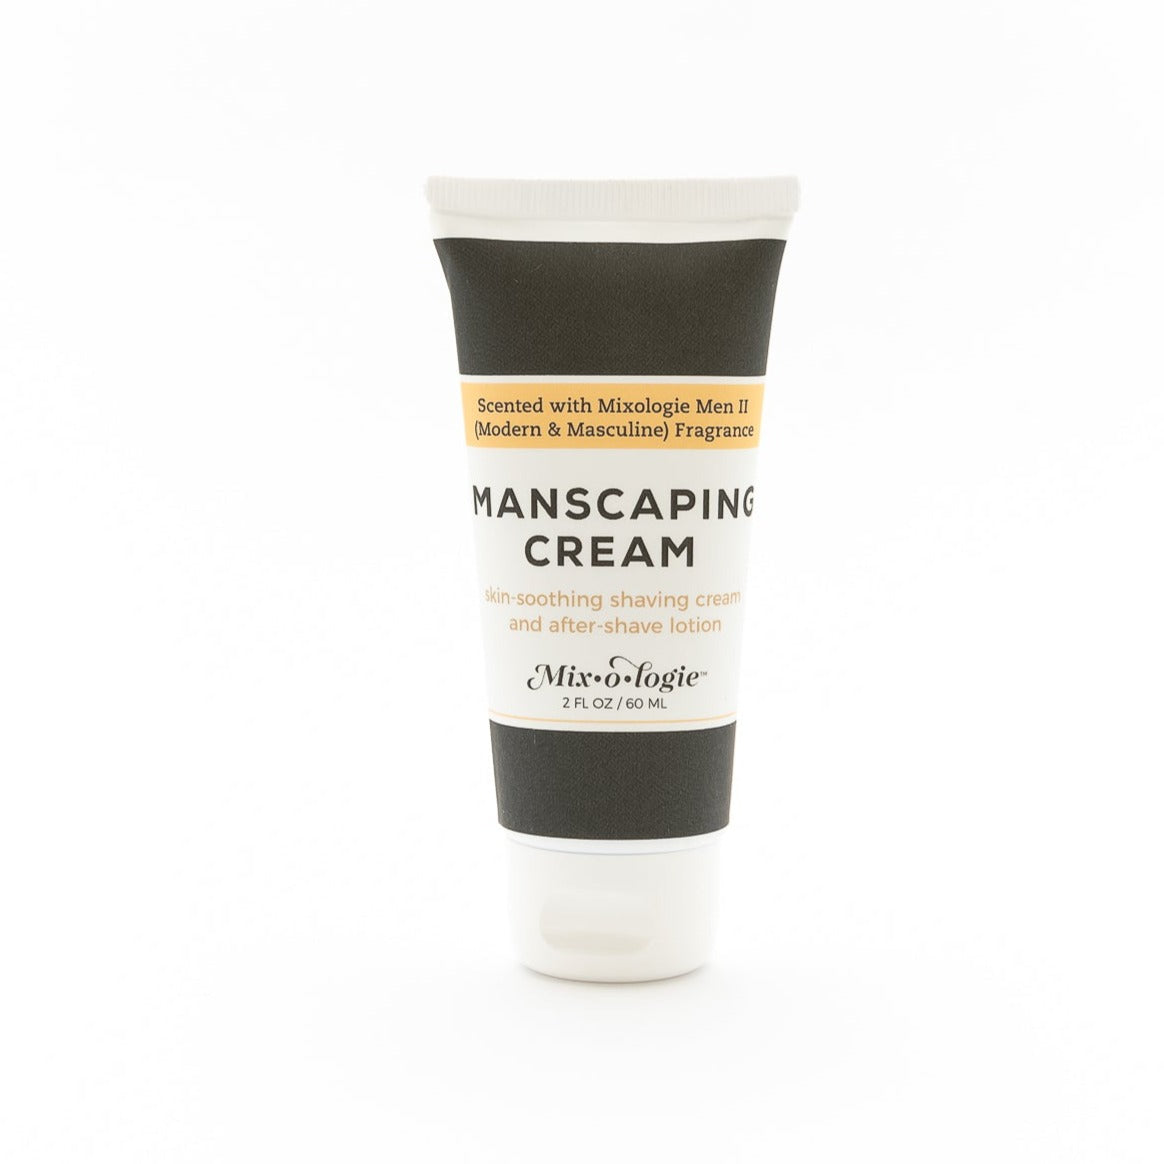 Men’s Manscaping Cream in Men’s II (Modern & Masculine) in a black and white tube with yellow accents. Skin-soothing shaving cream and after-shave lotion. 2 fl oz or 60 mL. Pictured on a white background.